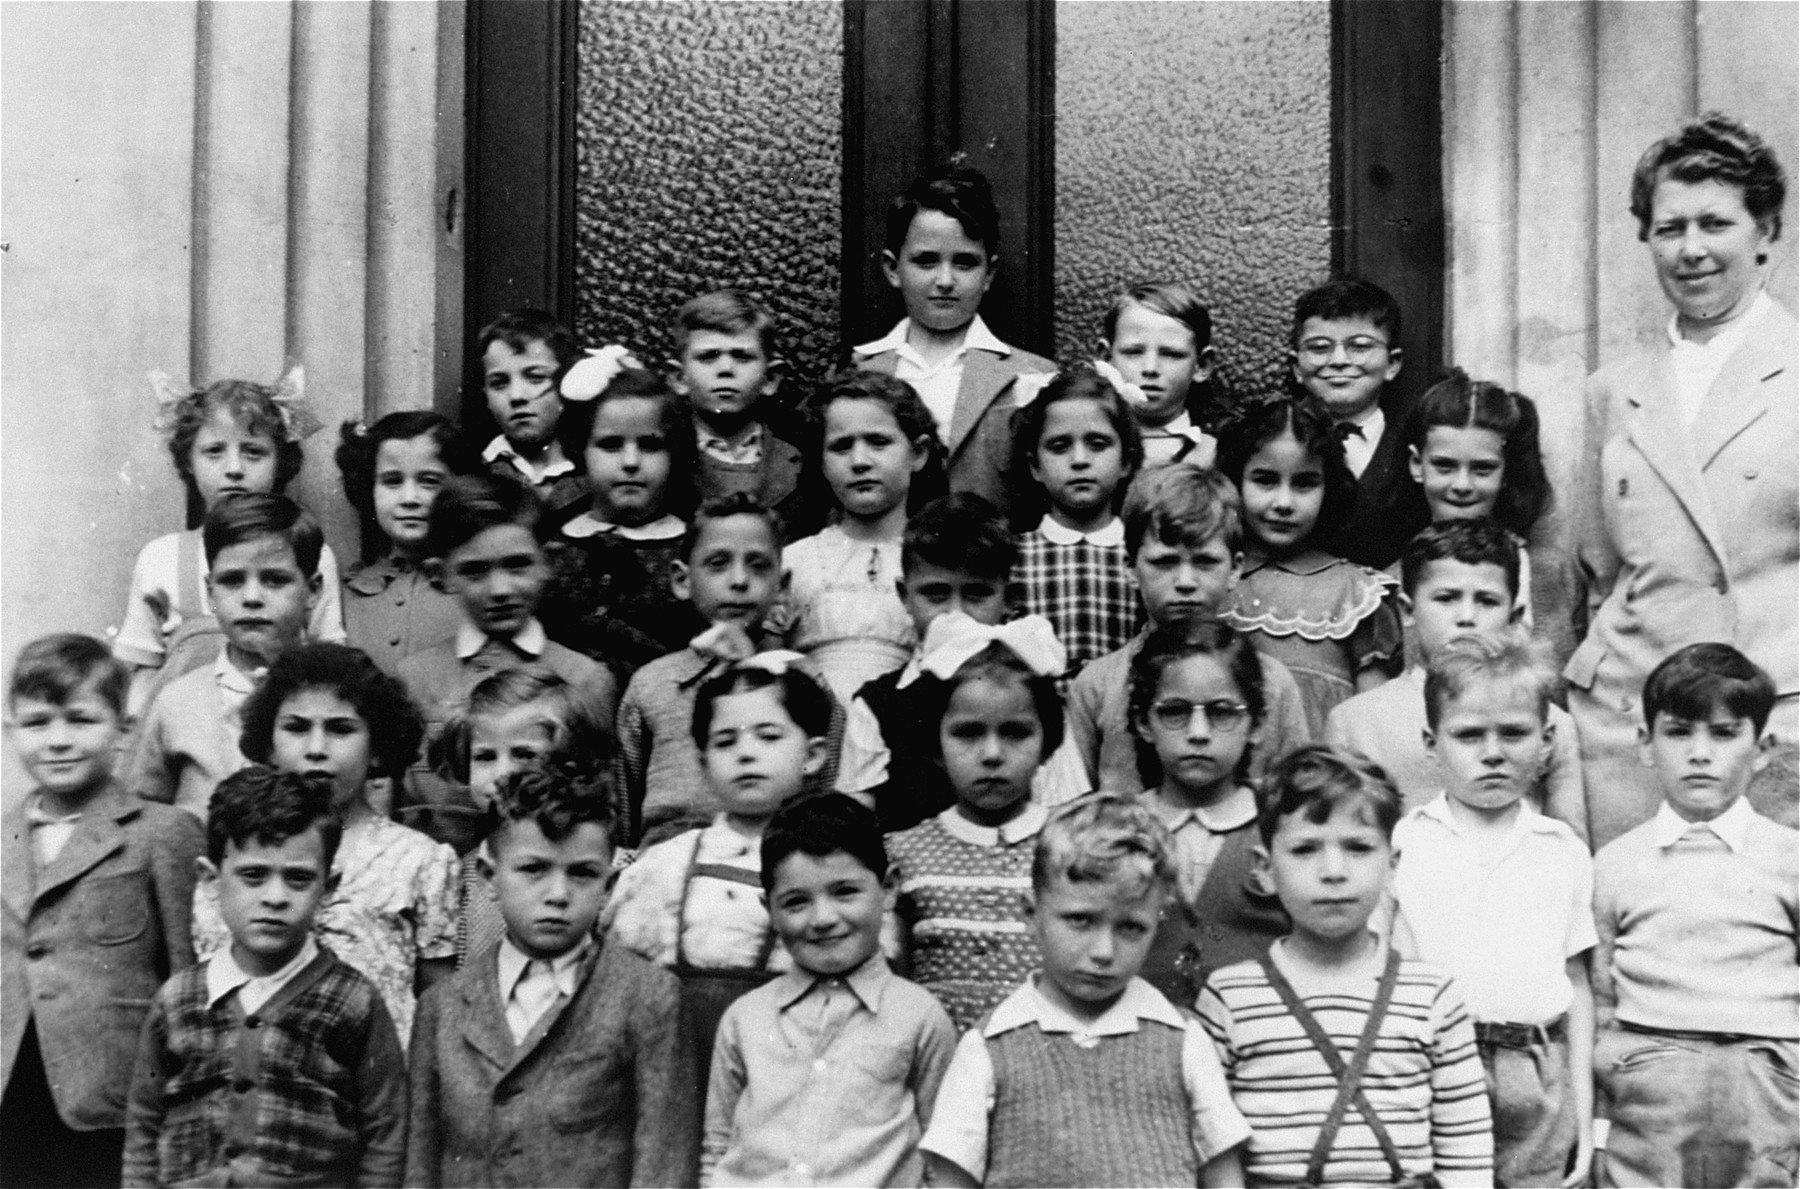 Group photo of the first grade class at the Tachkemoni Jewish private school in Antwerp.  

Jeanine Ament, is pictured in the second row from the front, fourth from the right.  The teacher is Mme Boucher.